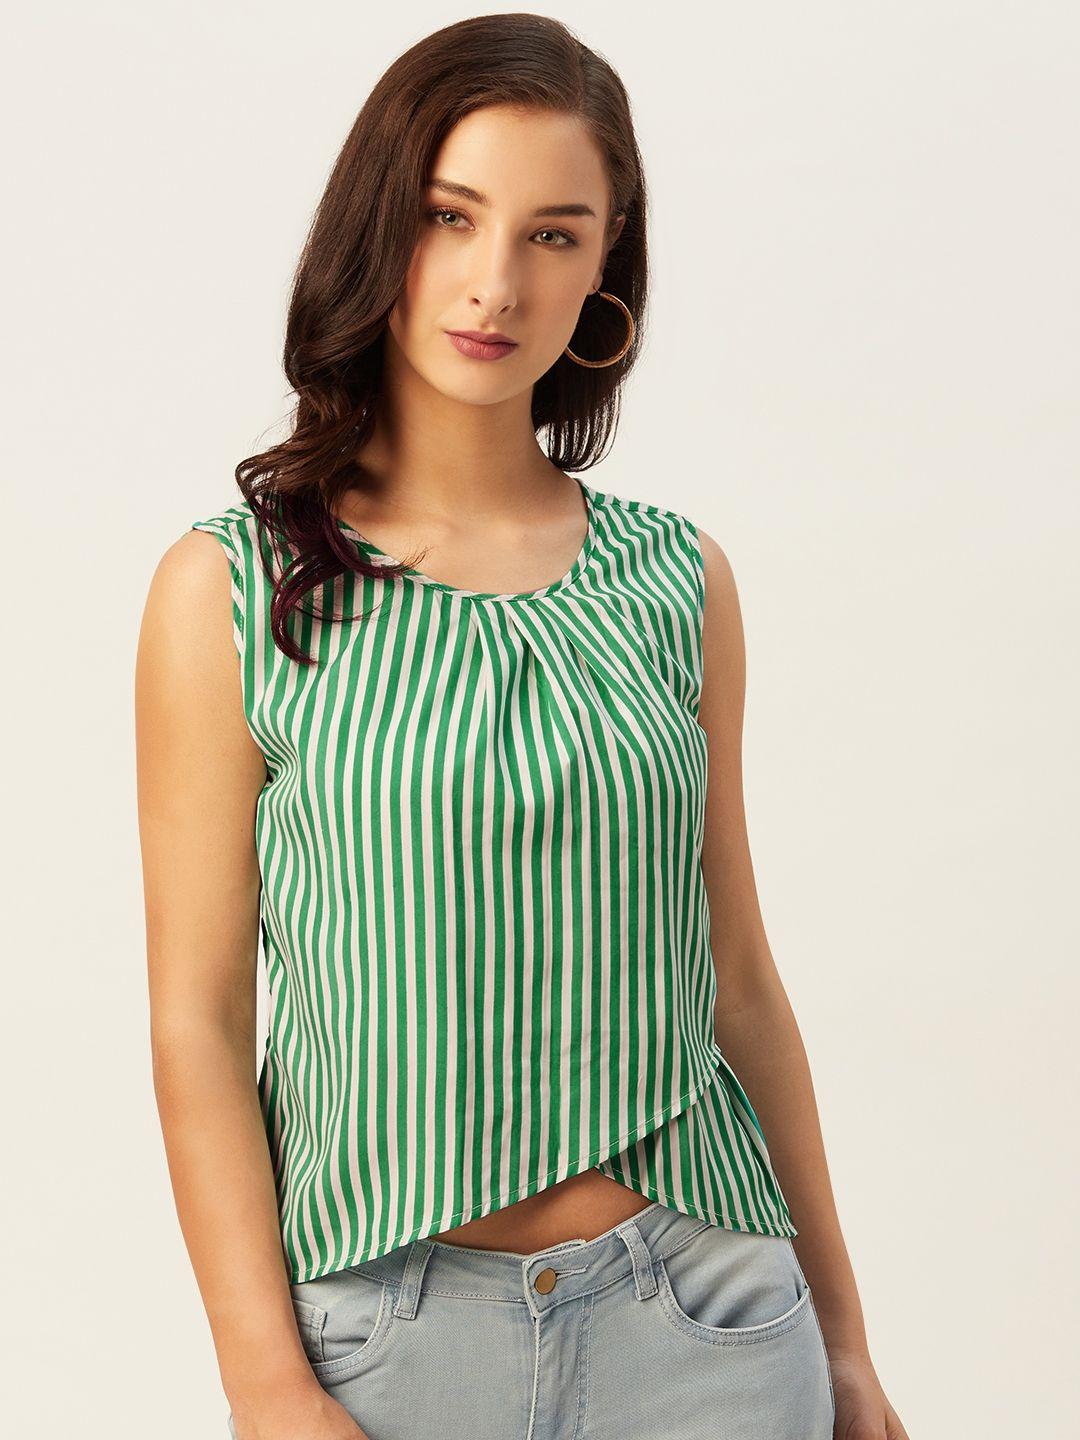 belle-fille-white-&-green-striped-high-low-crop-top